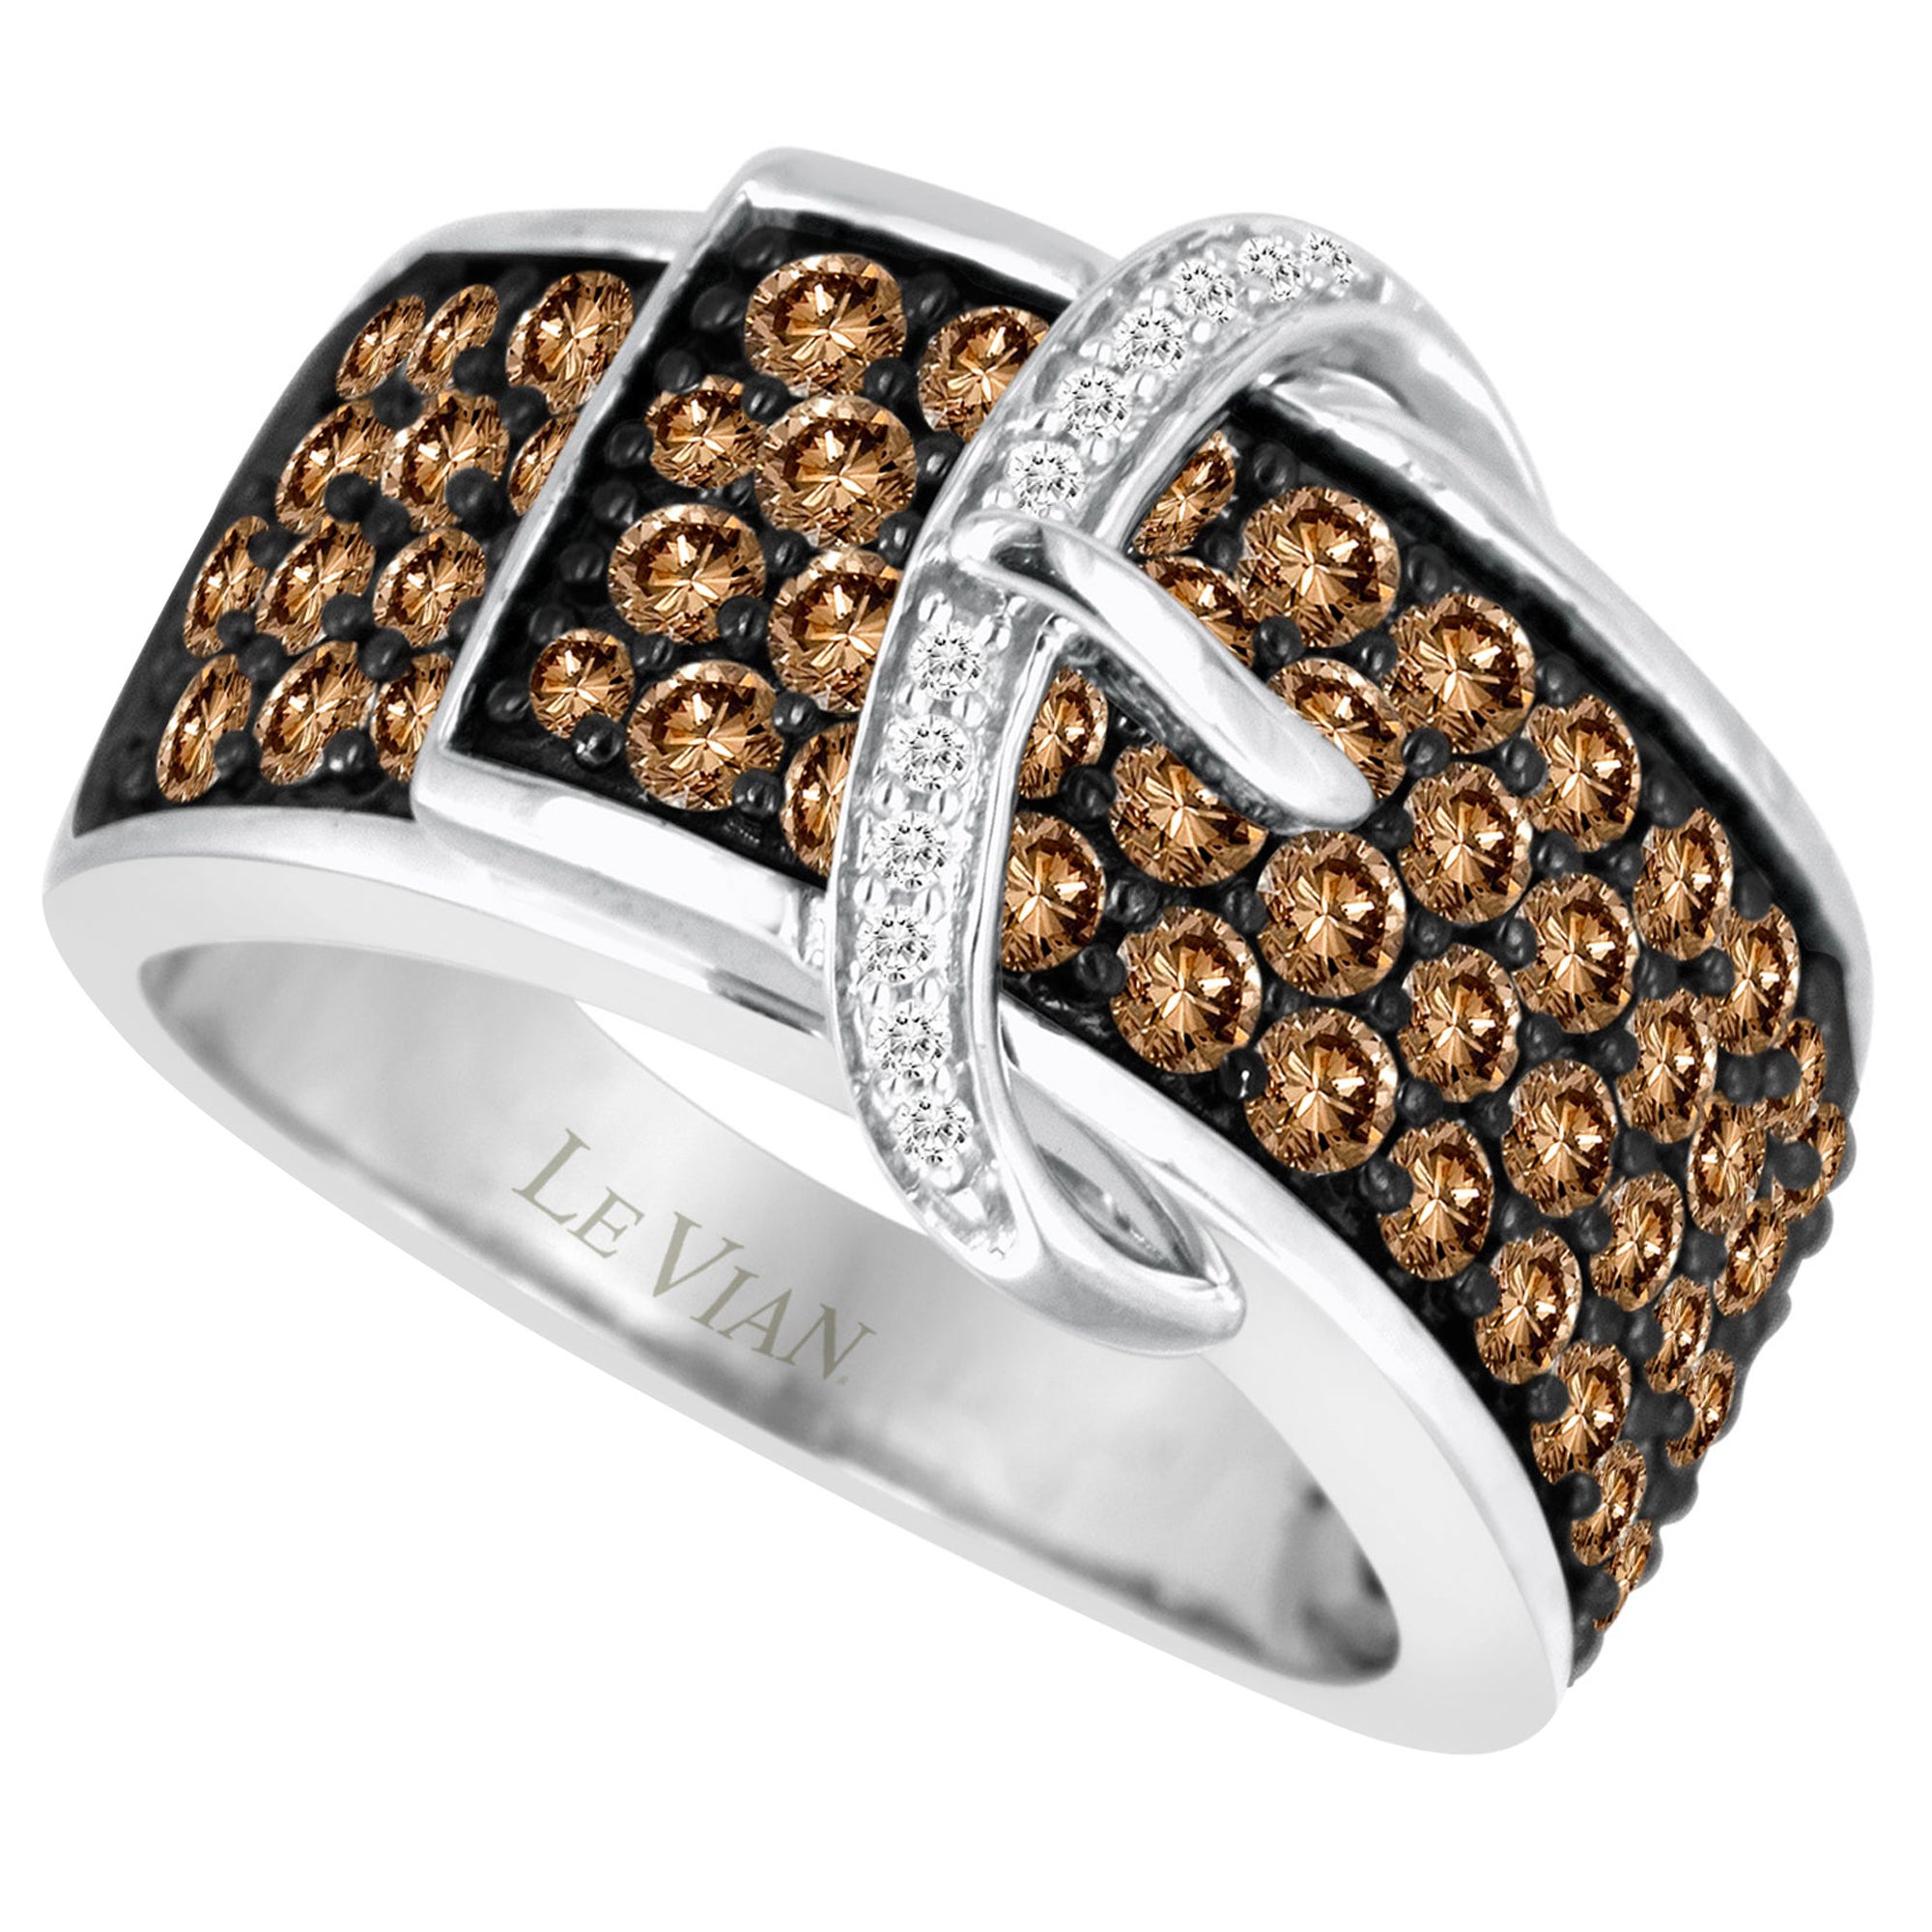 LeVian 14K White Gold Round Chocolate Brown Diamond Cluster Buckle Cocktail Ring